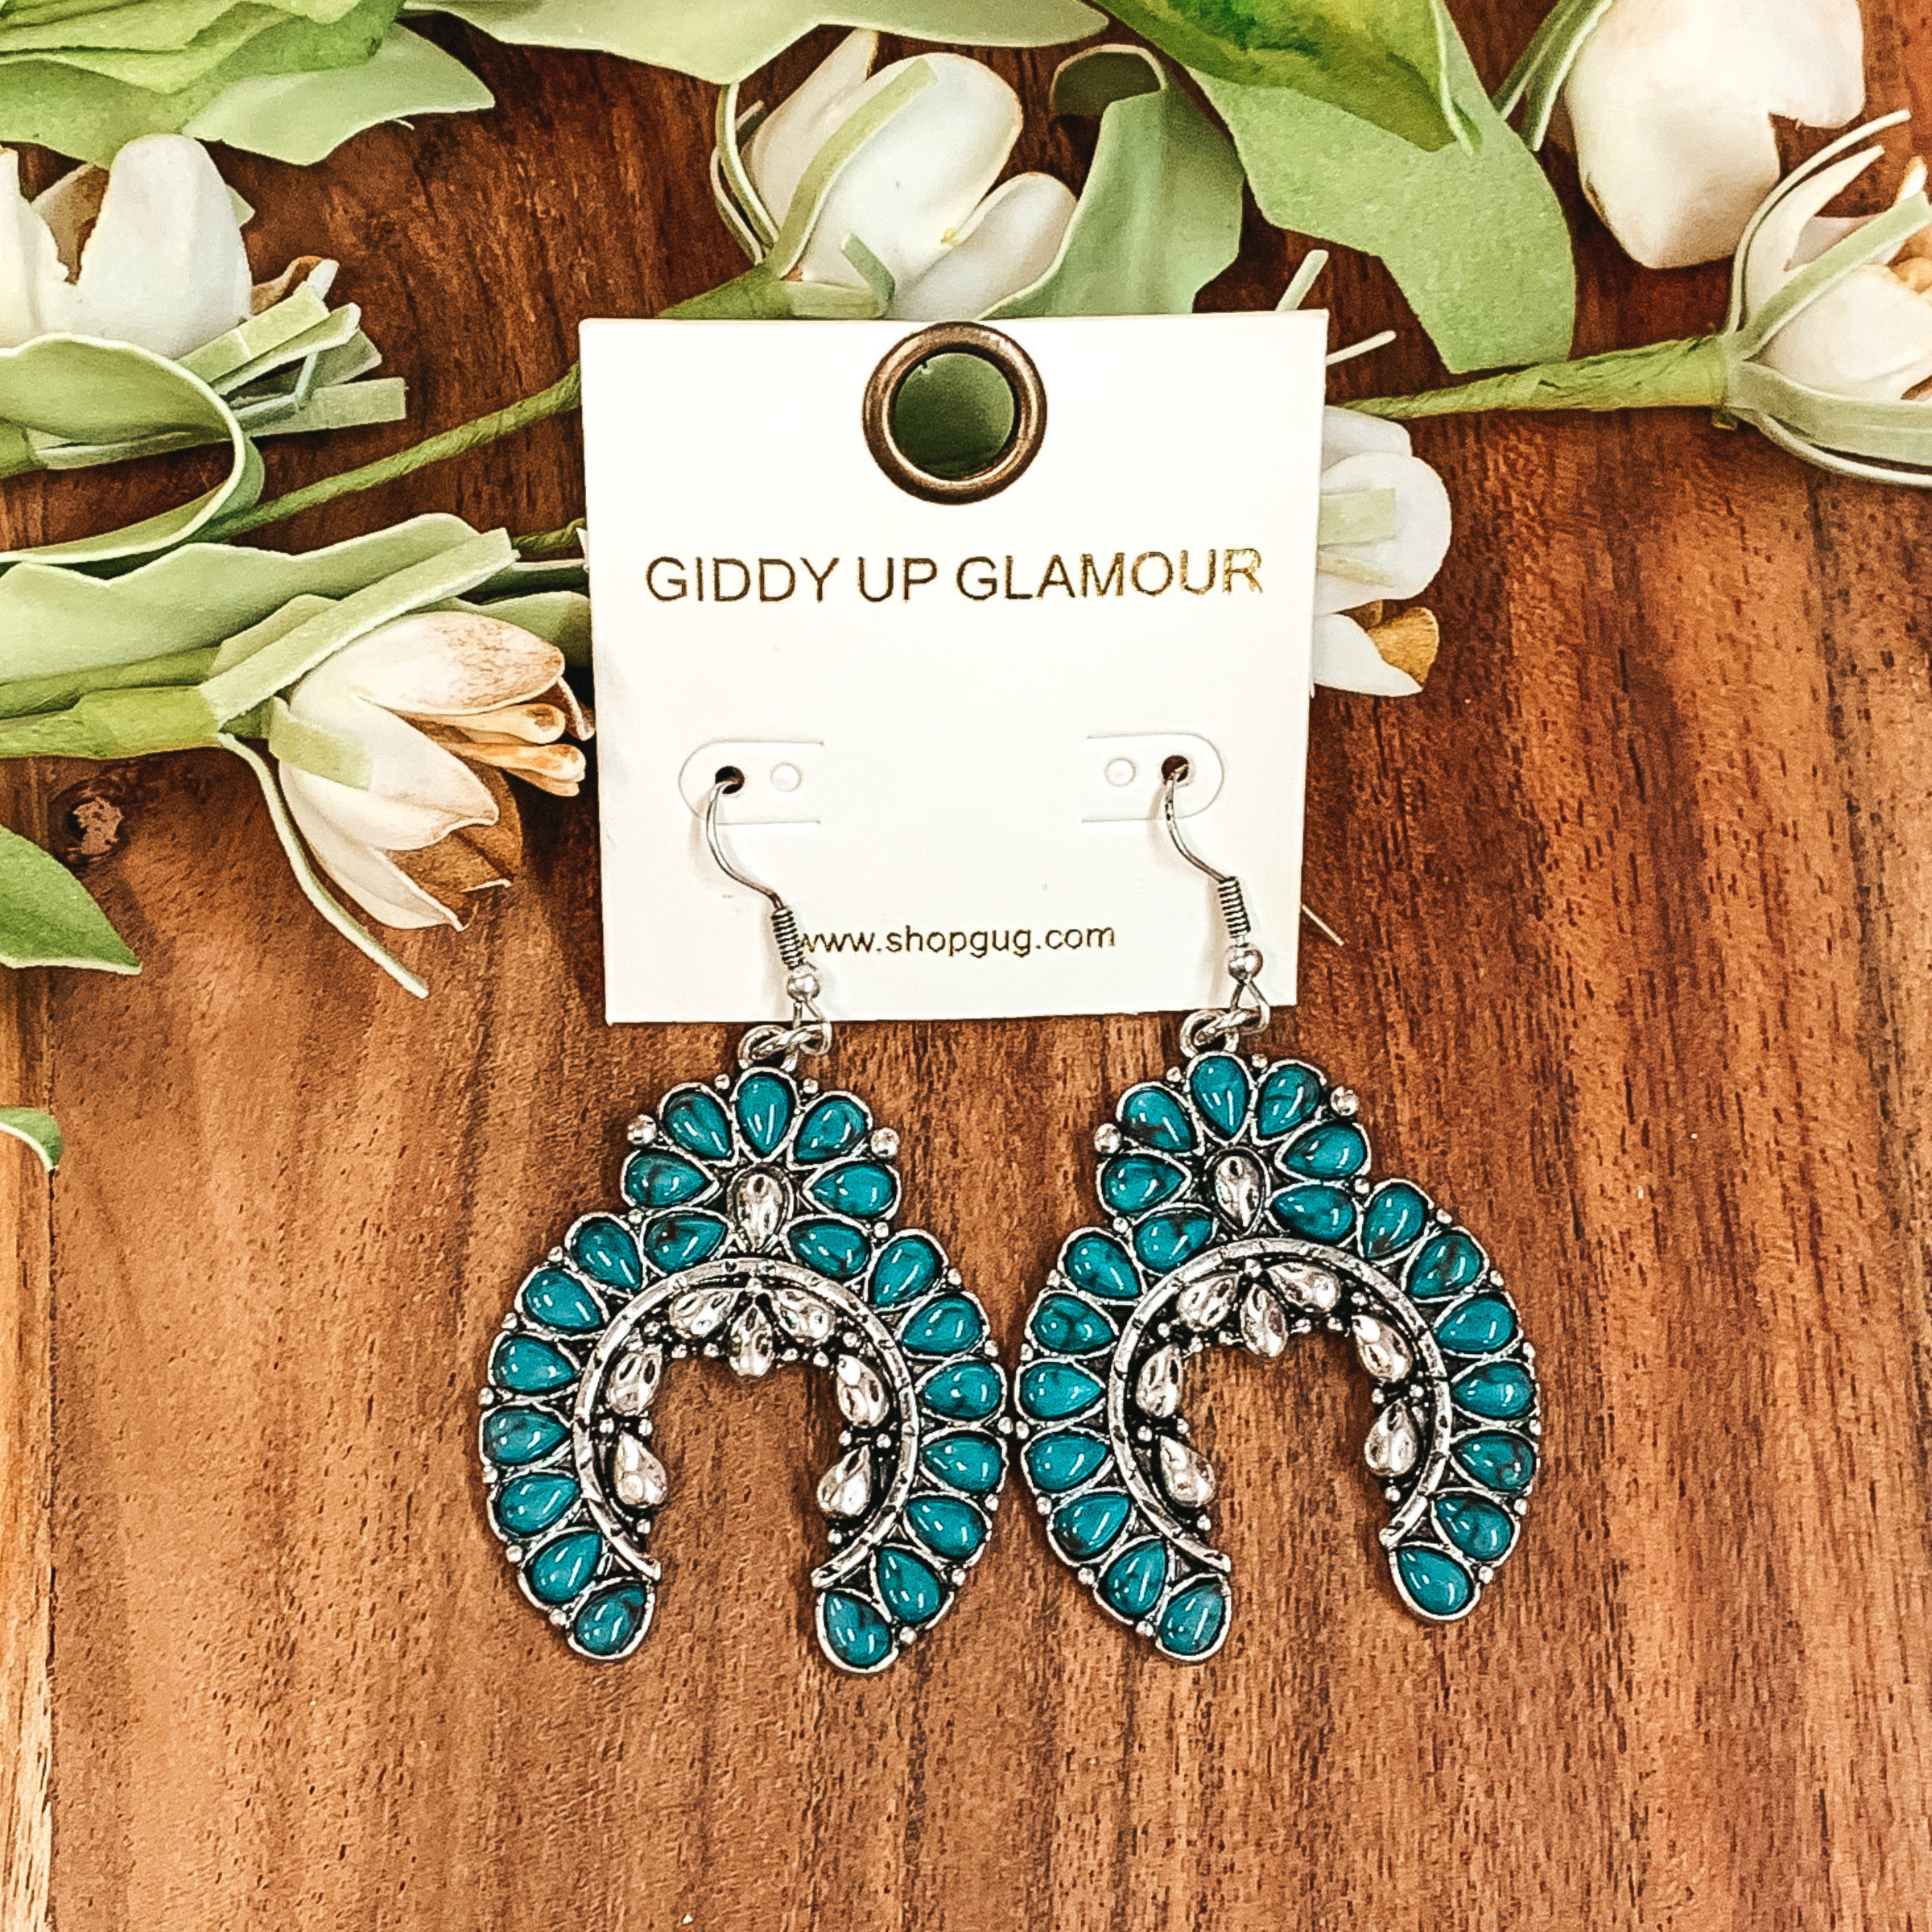 Western Squash Blossom Earrings in Turquoise - Giddy Up Glamour Boutique